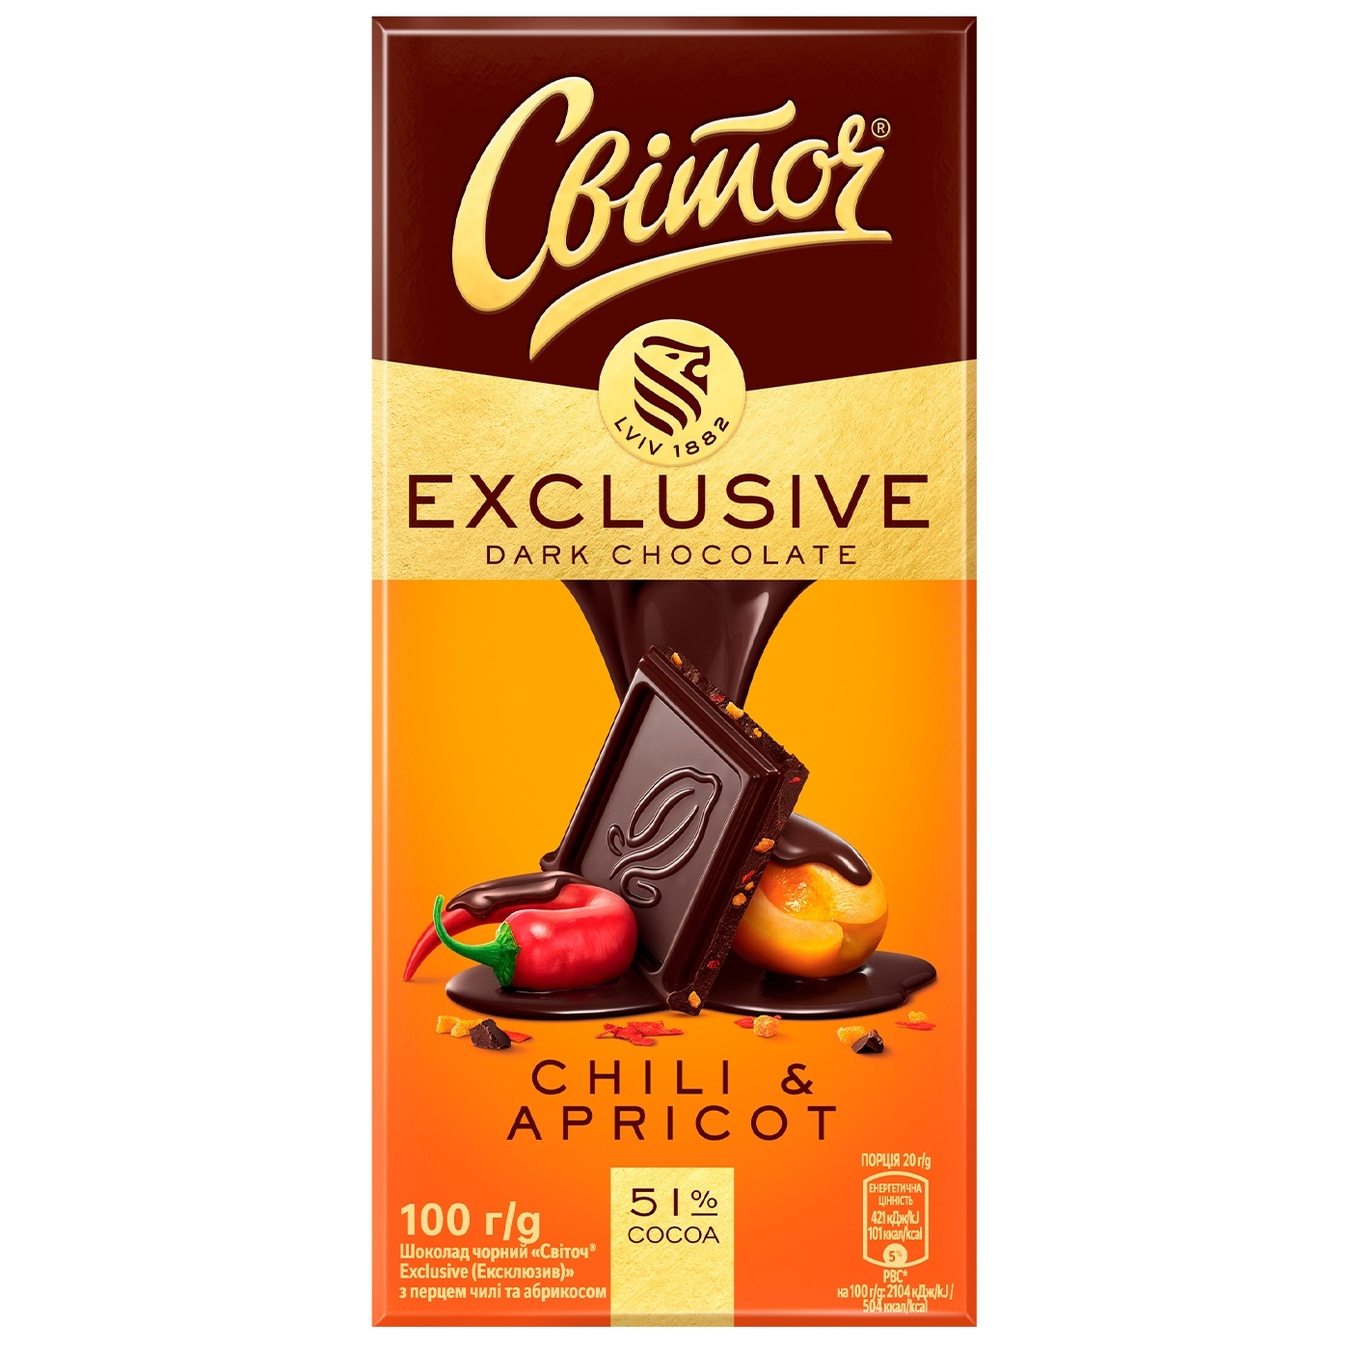 Svitoch Exclusive Dark Chocolate with Chili and Apricot 51% 100g